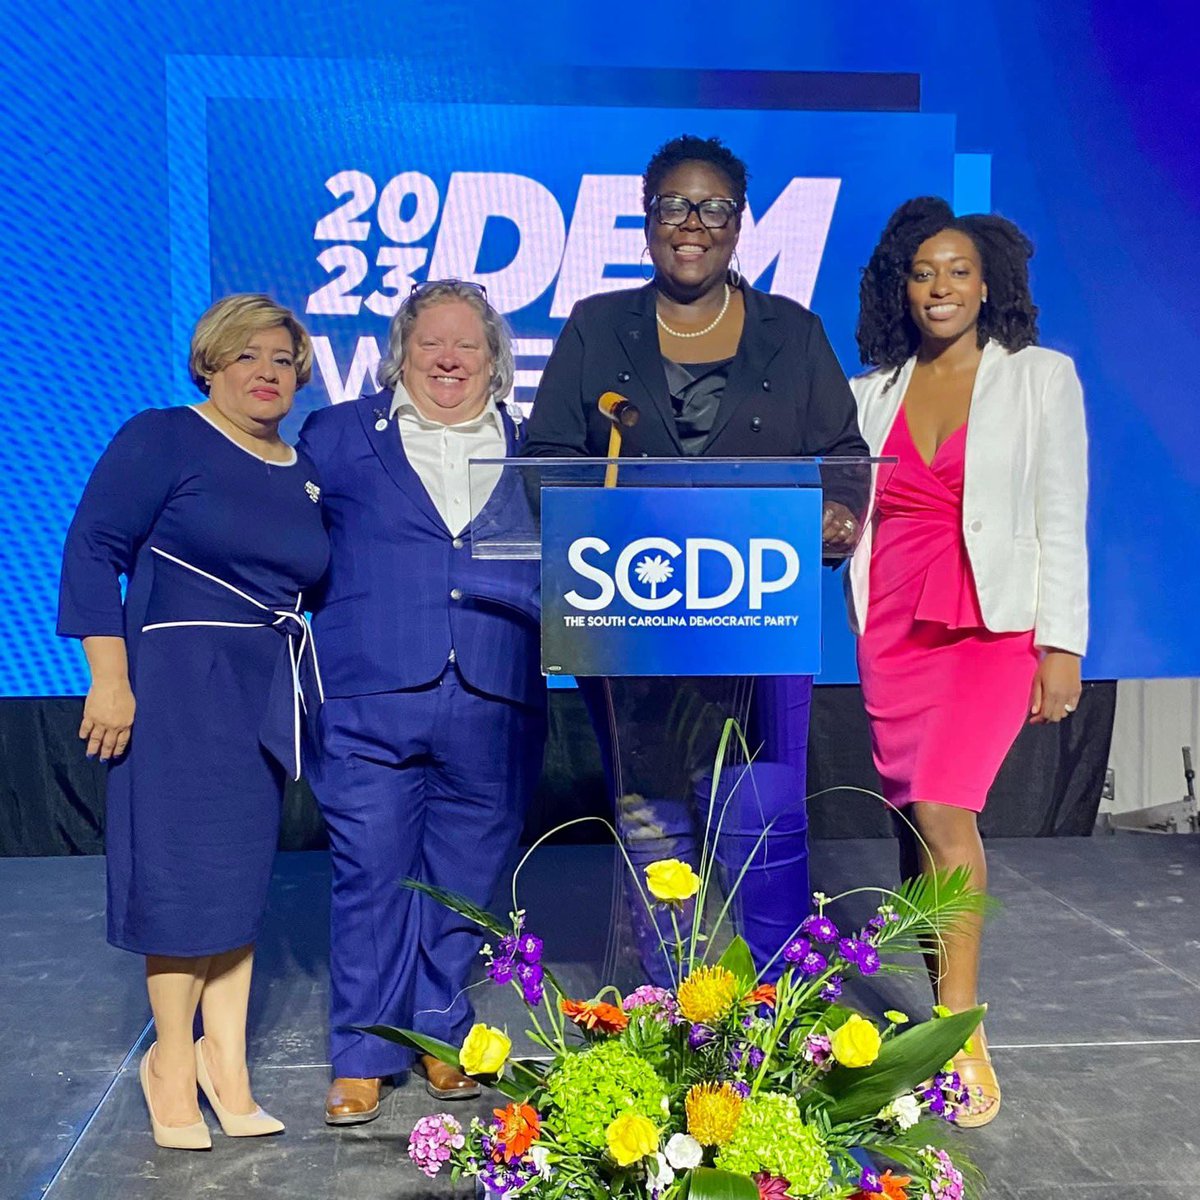 Congratulations to this historic @scdp ticket. Looking good for 2024.